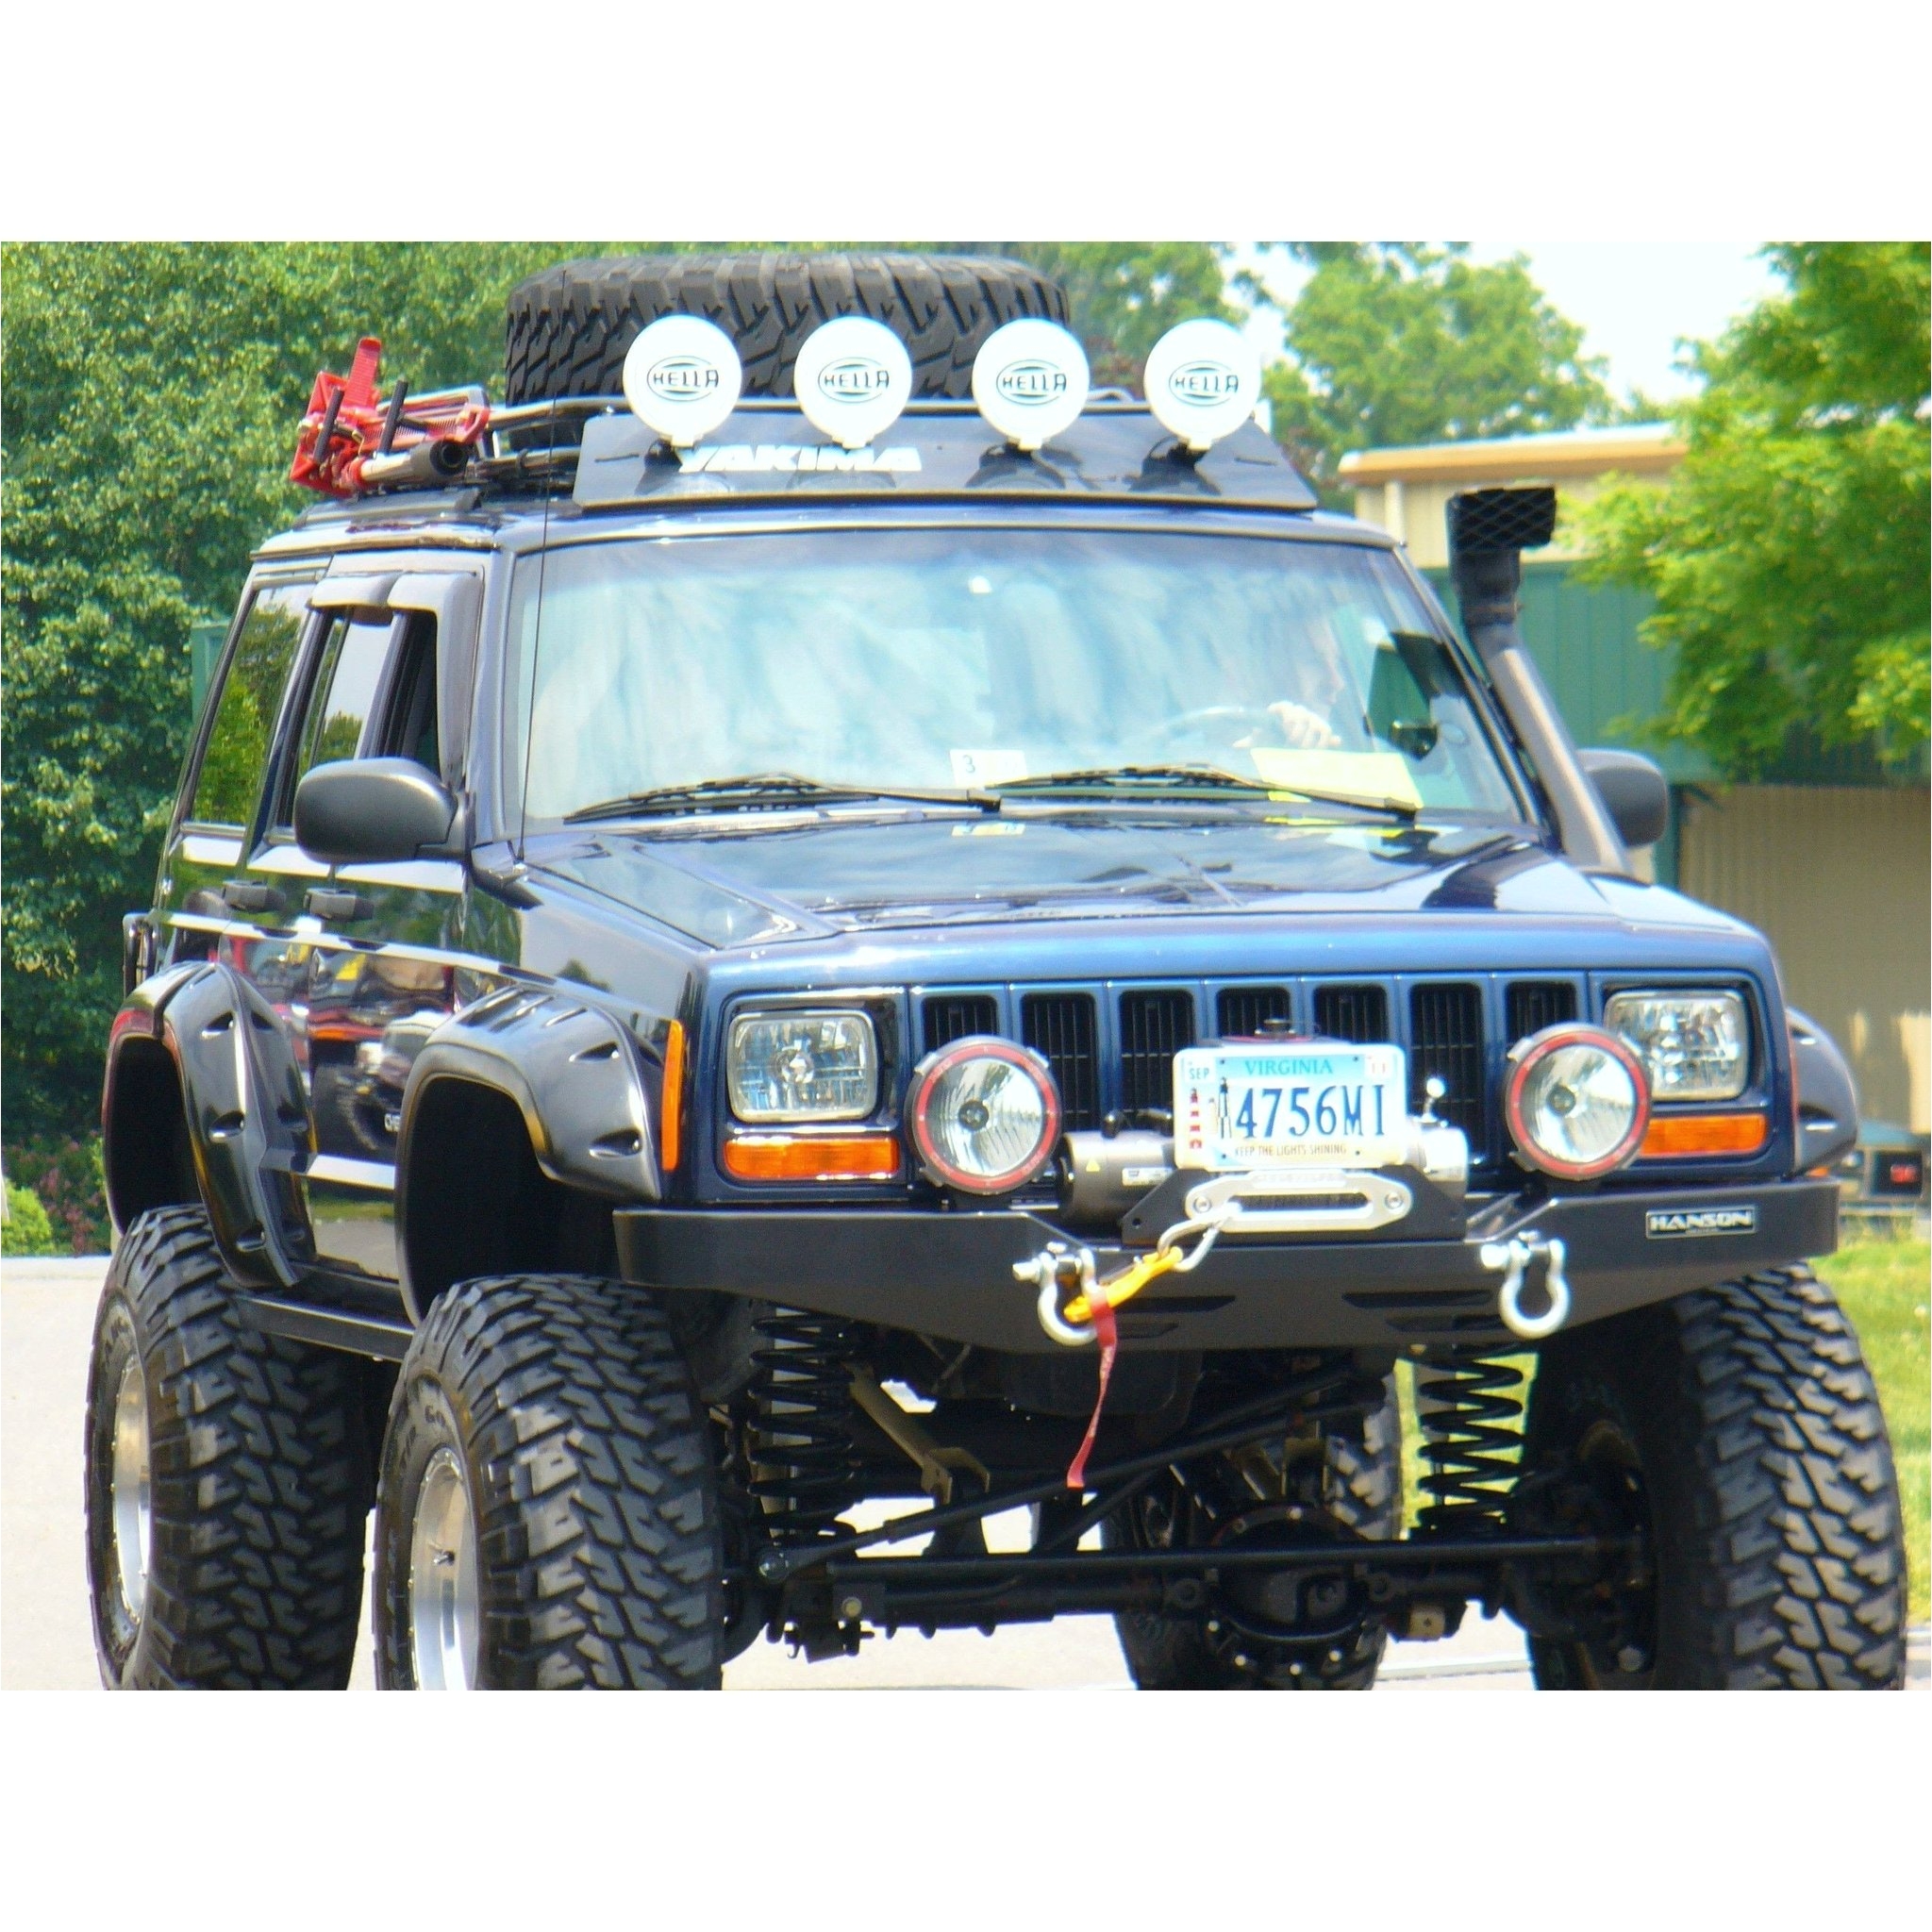 jeep cherokee roof rack xj roof rack kevinsoffroad com overland ready